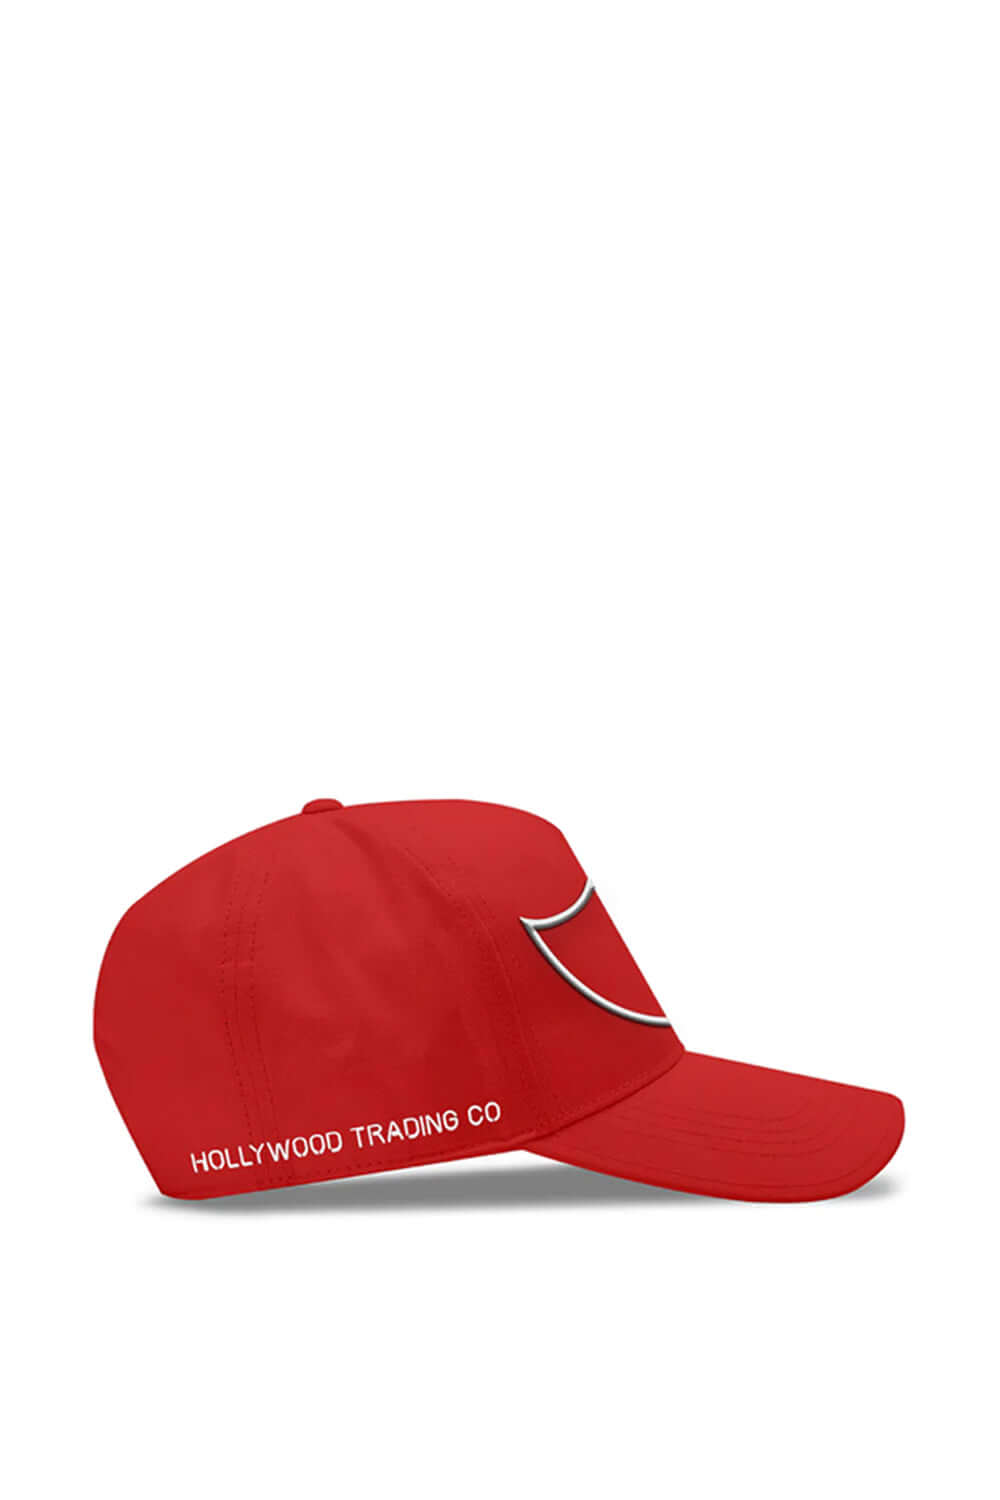 HTC LOGO BASEBALL CAP Red baseball hat, HTC Los Angeles white logo embroidered on the front. One Size. Composition: 100% Cotton. HTC LOS ANGELES